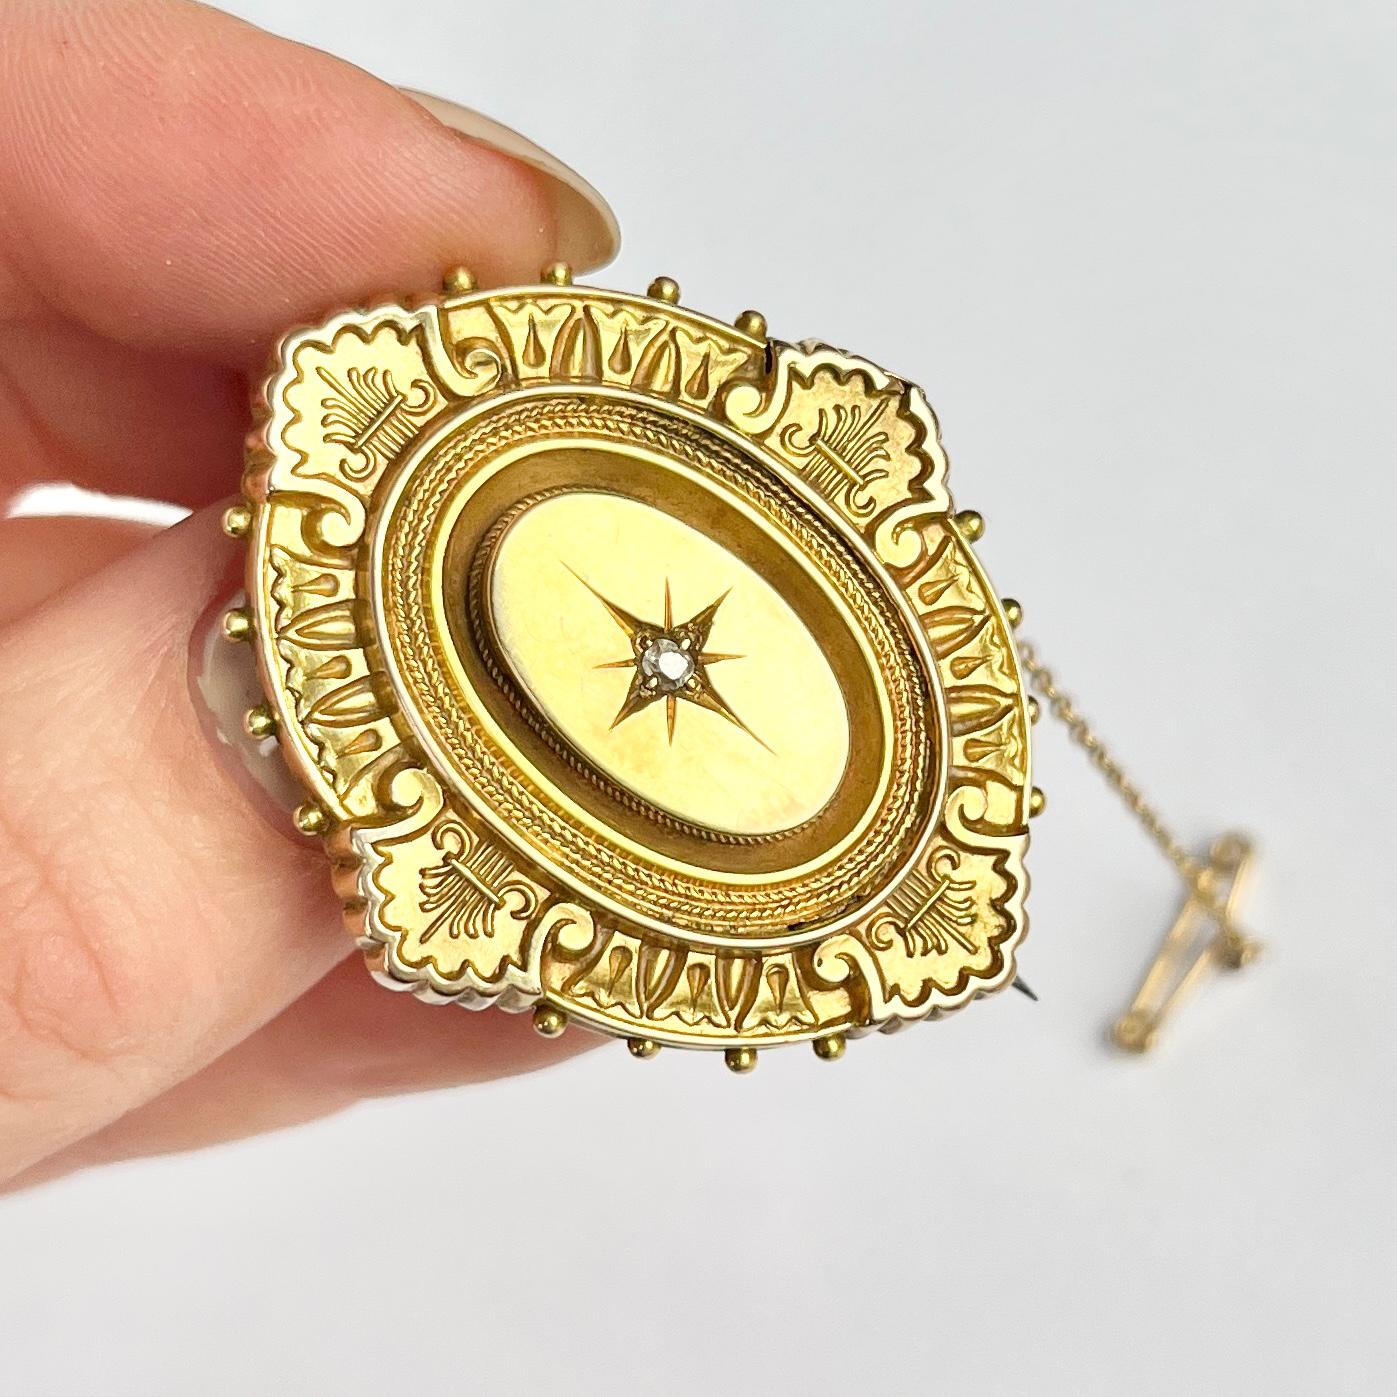 This gorgeous victorian brooch holds a rose cut diamond at the centre and is modelled in 18carat gold. The back of the locket has a pane of glass which created a locket. There is a pin on the back.

Brooch Dimensions: 40x33mm

Weight: 8.6g